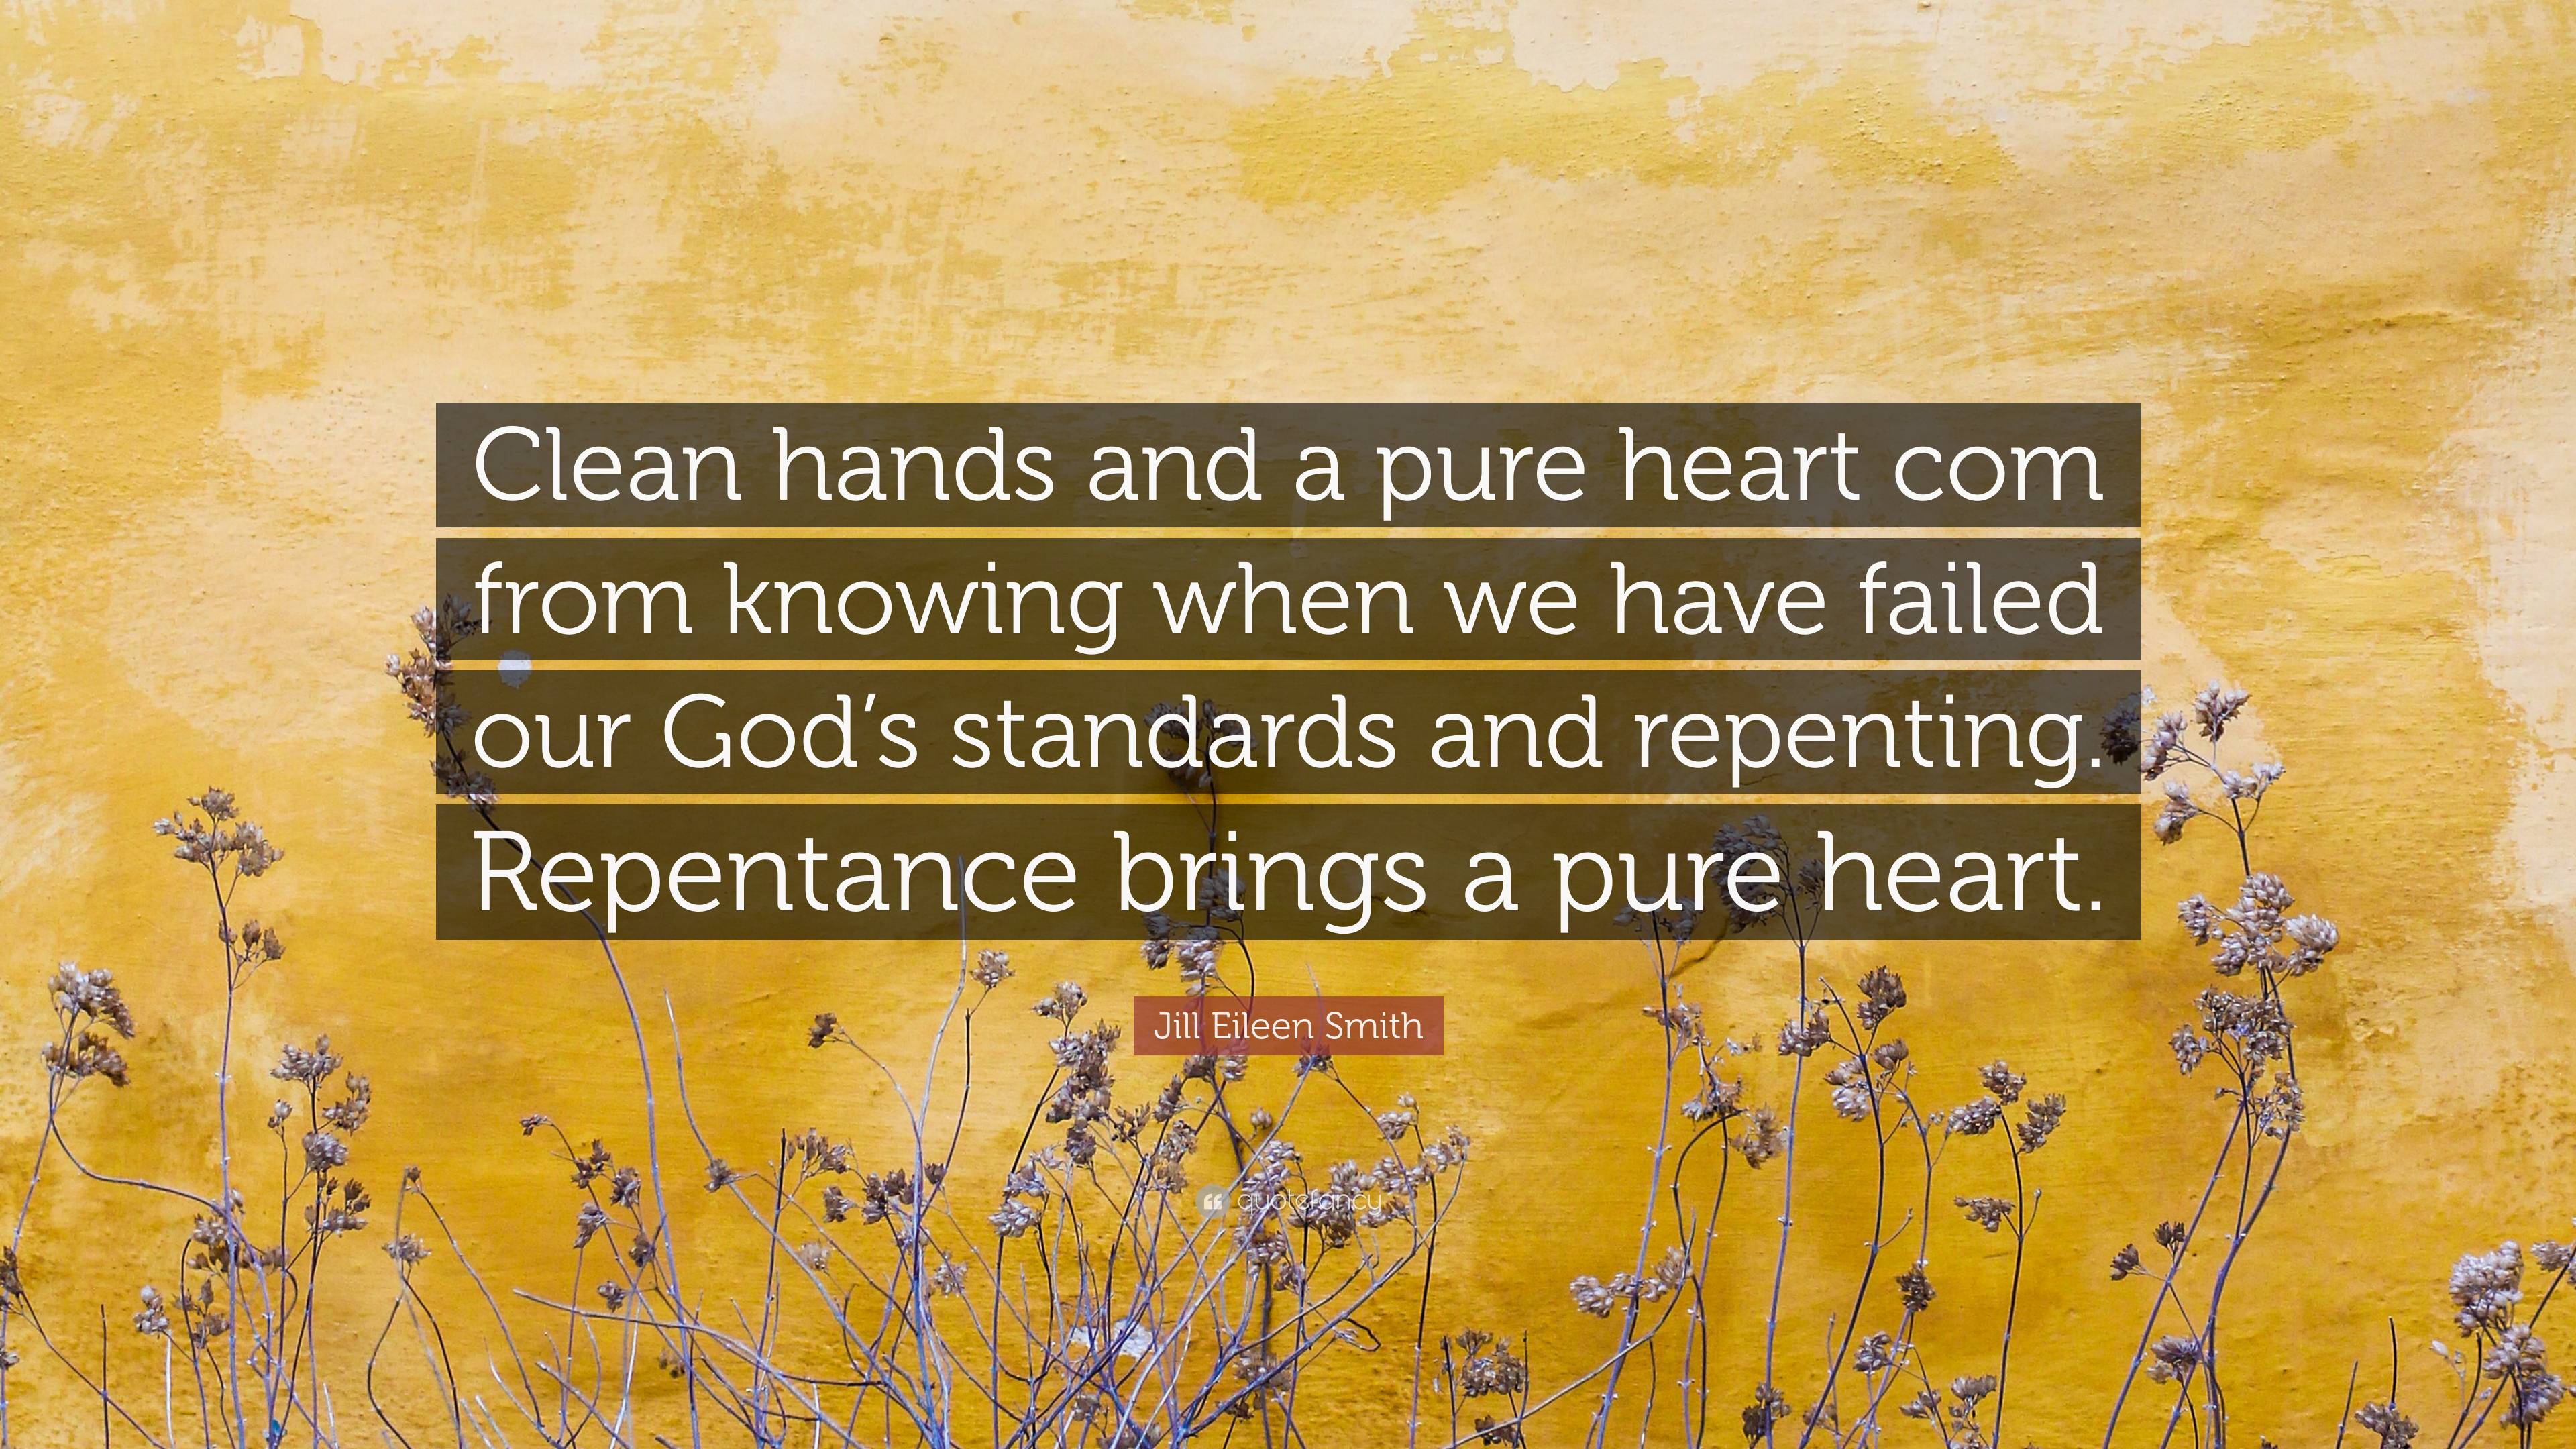 clean hands and a pure heart verses